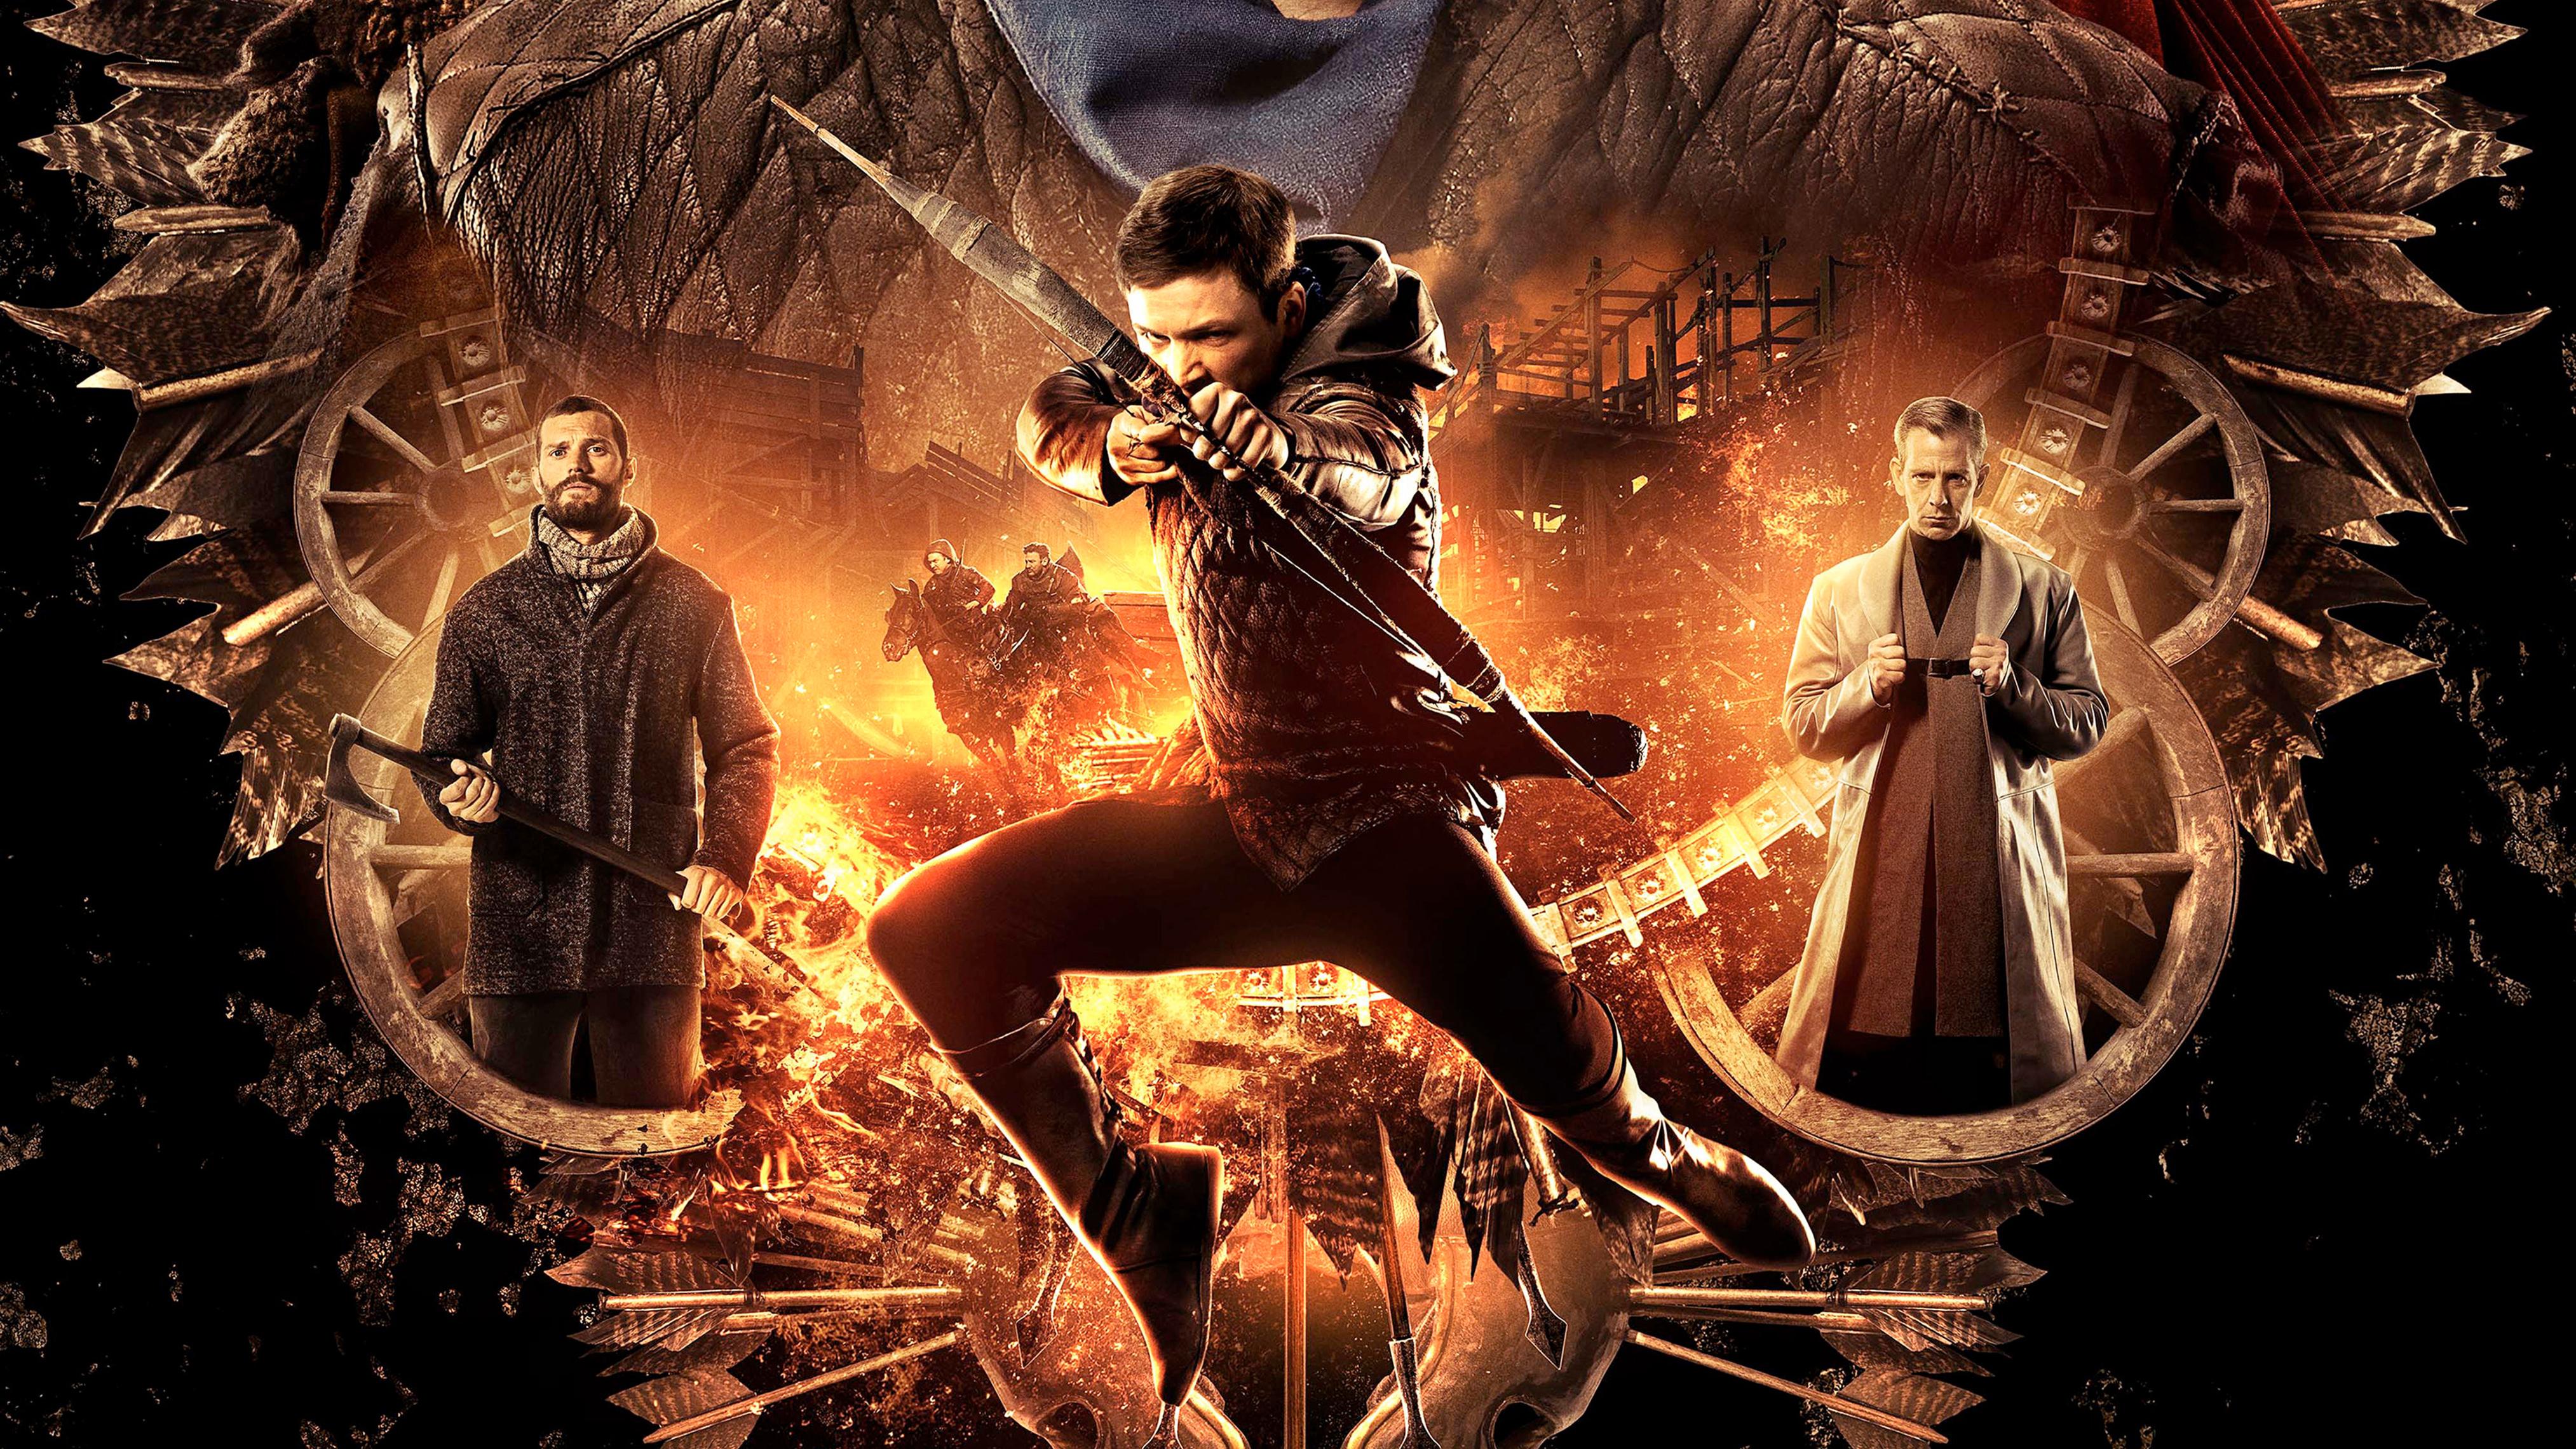 4054 x 2280 · jpeg - Robin Hood Movie 4K Poster, HD Movies, 4k Wallpapers, Images ...